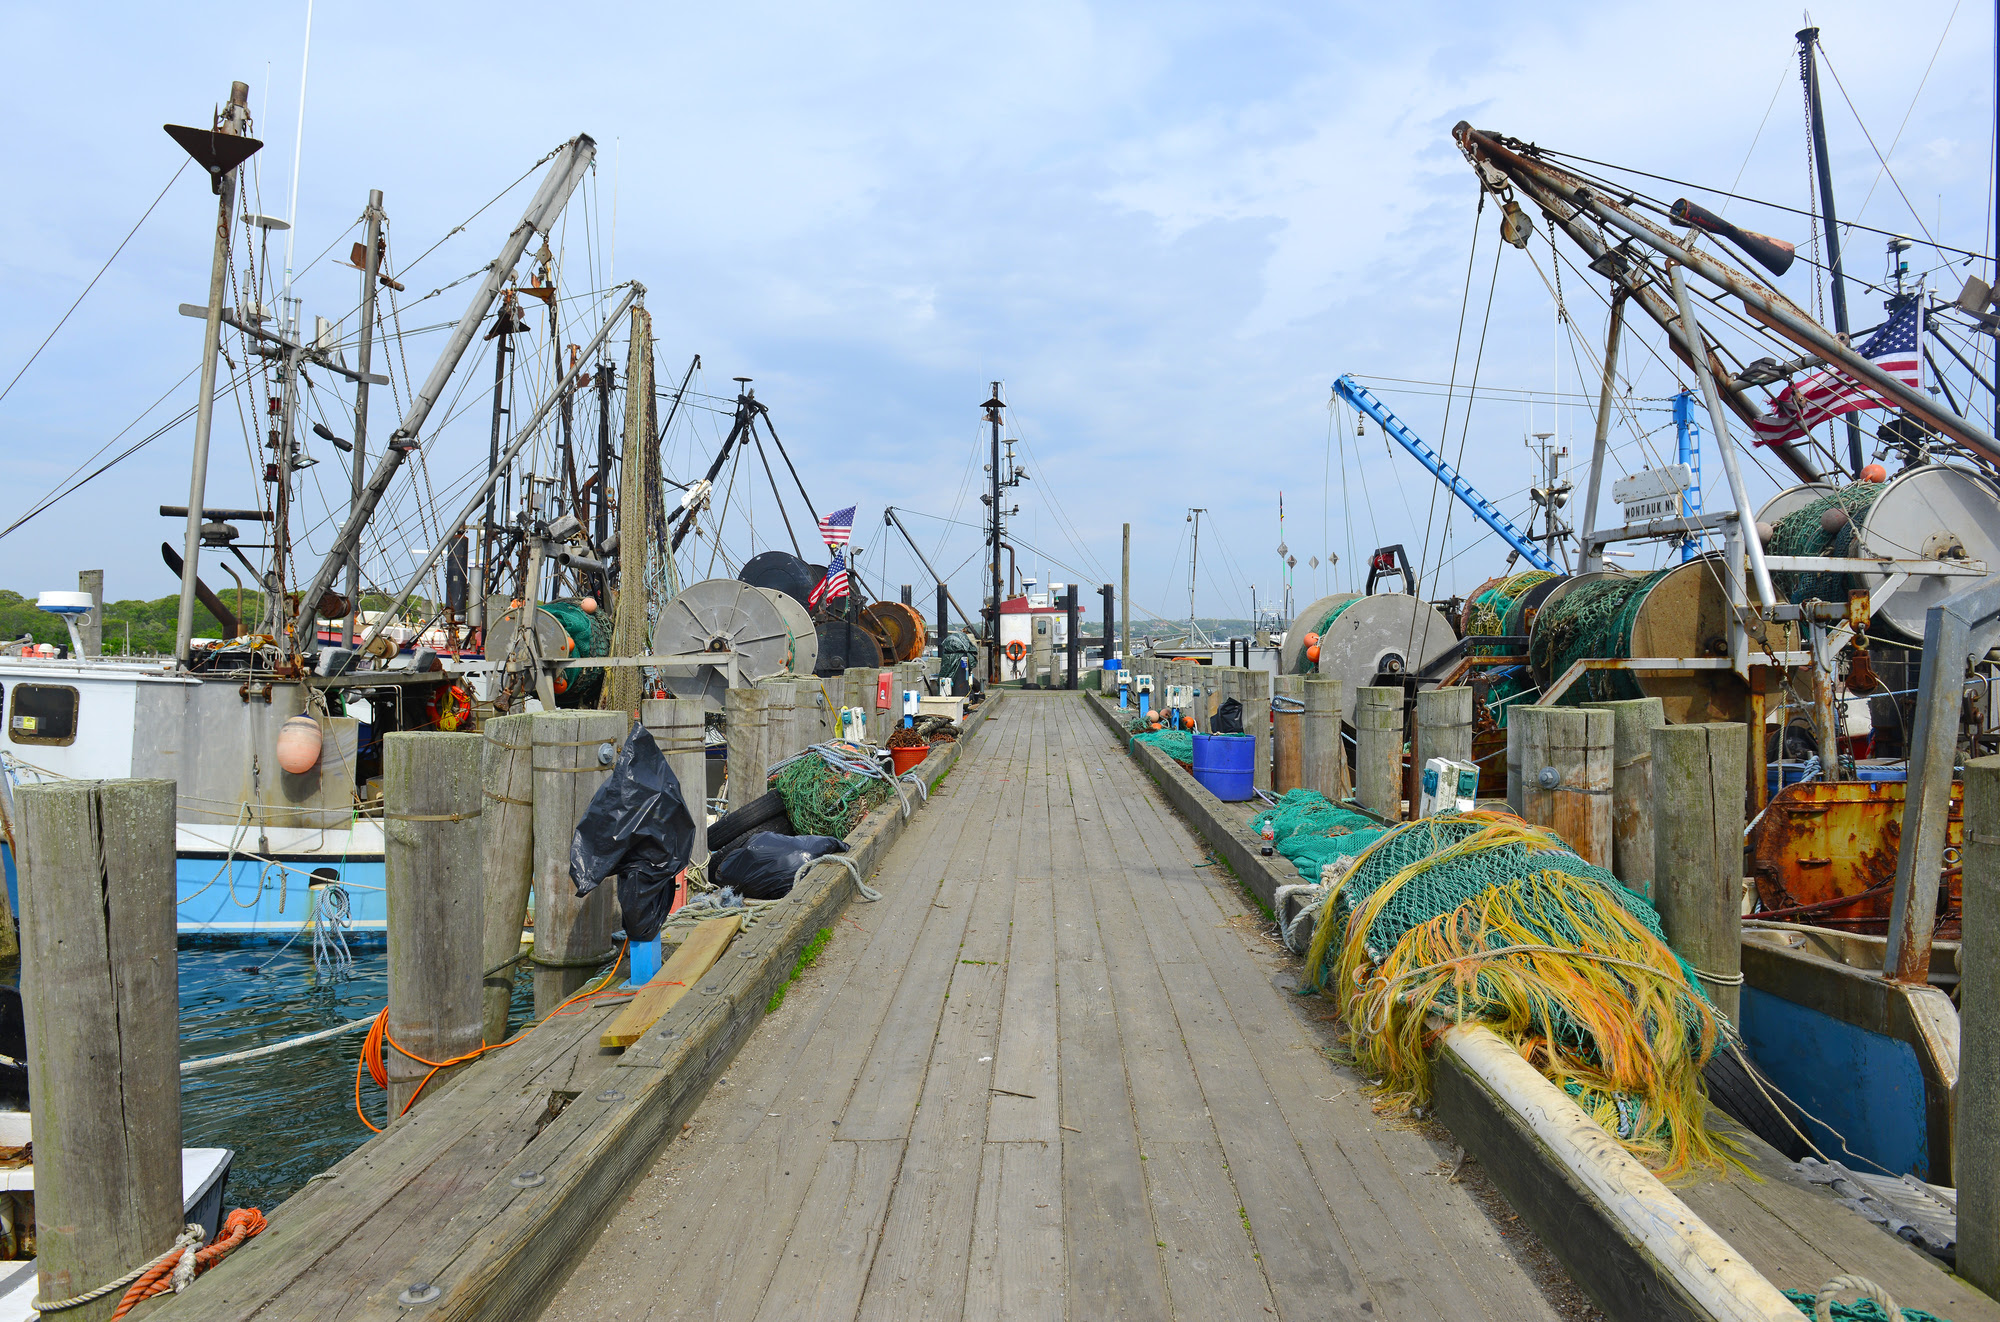 commercial fishing gear and vessels at a commercial fishing dock